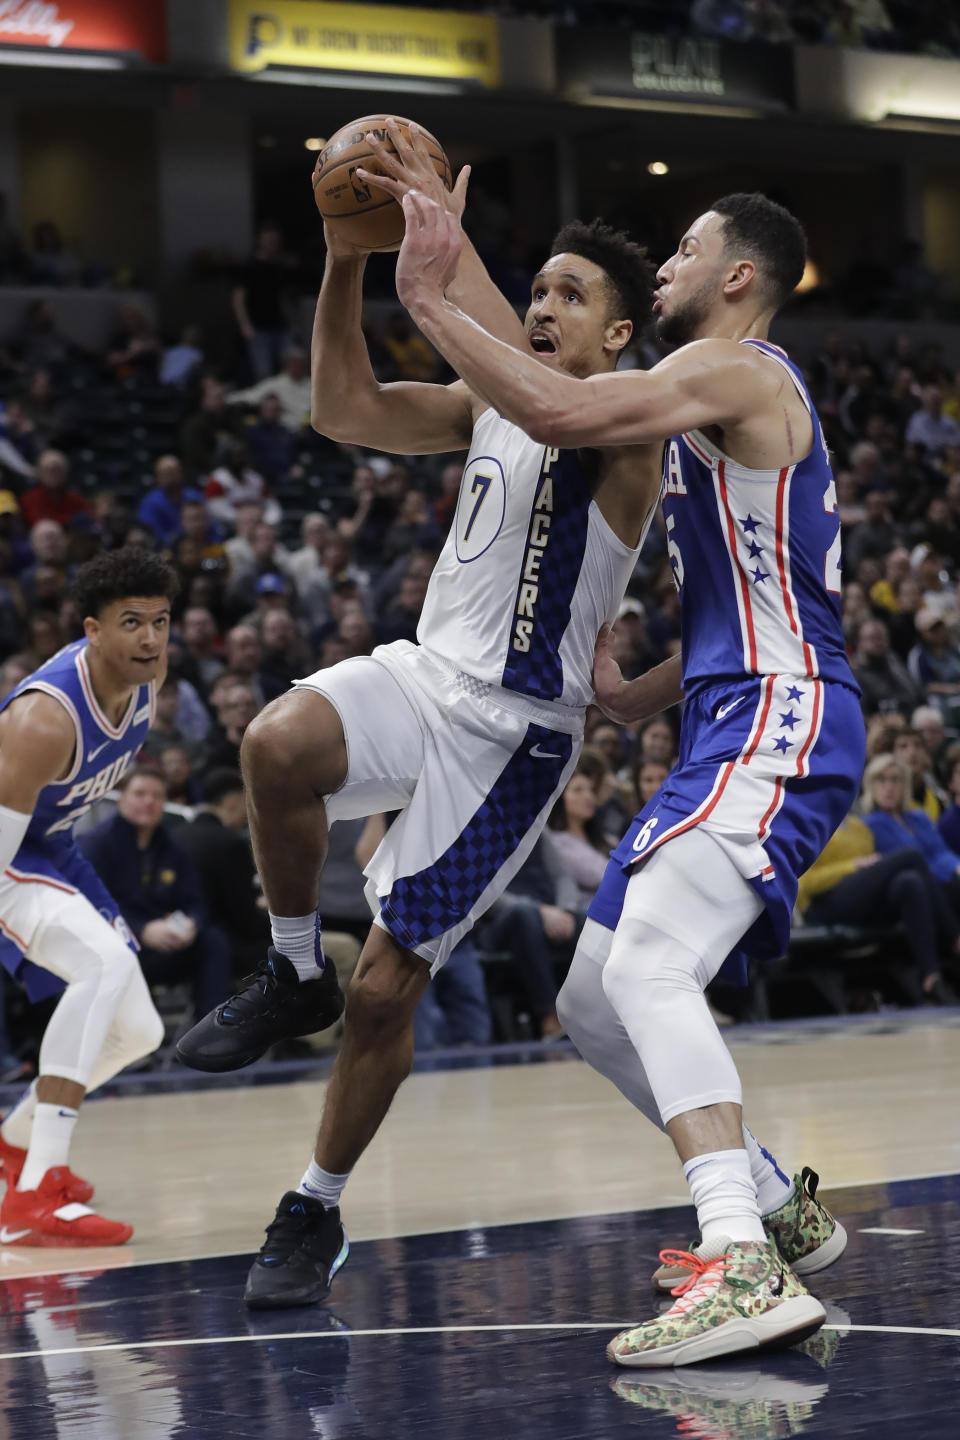 Indiana Pacers' Malcolm Brogdon (7) is fouled by Philadelphia 76ers' Ben Simmons (25) as he goes up for a shot during the first half of an NBA basketball game, Monday, Jan. 13, 2020, in Indianapolis. (AP Photo/Darron Cummings)